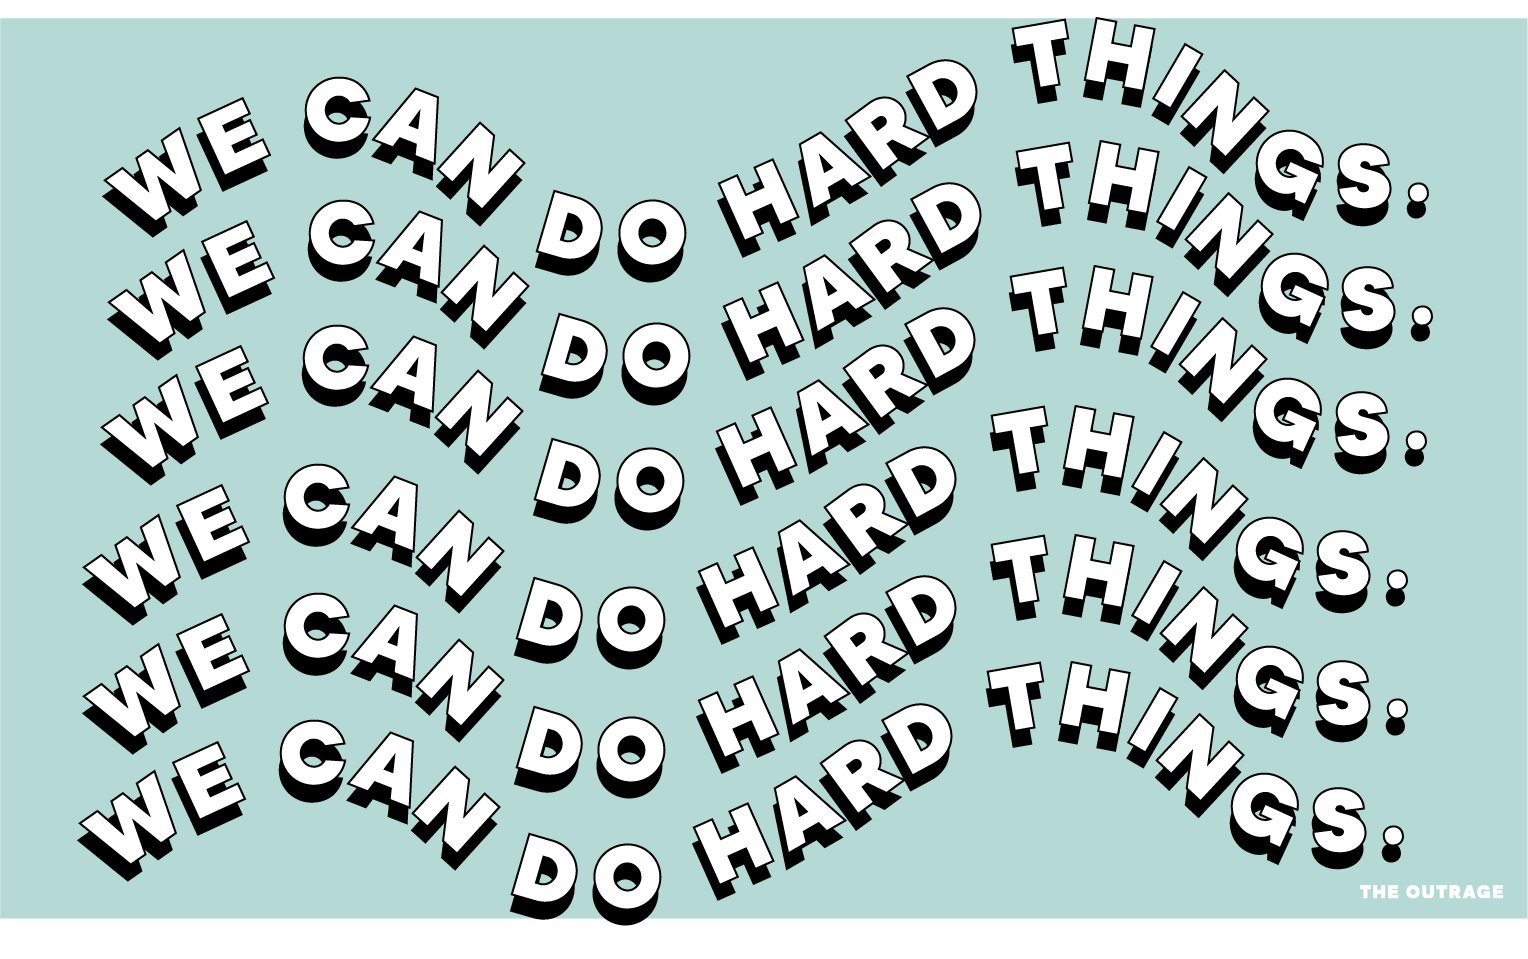 We Can Do Hard Things Postcard